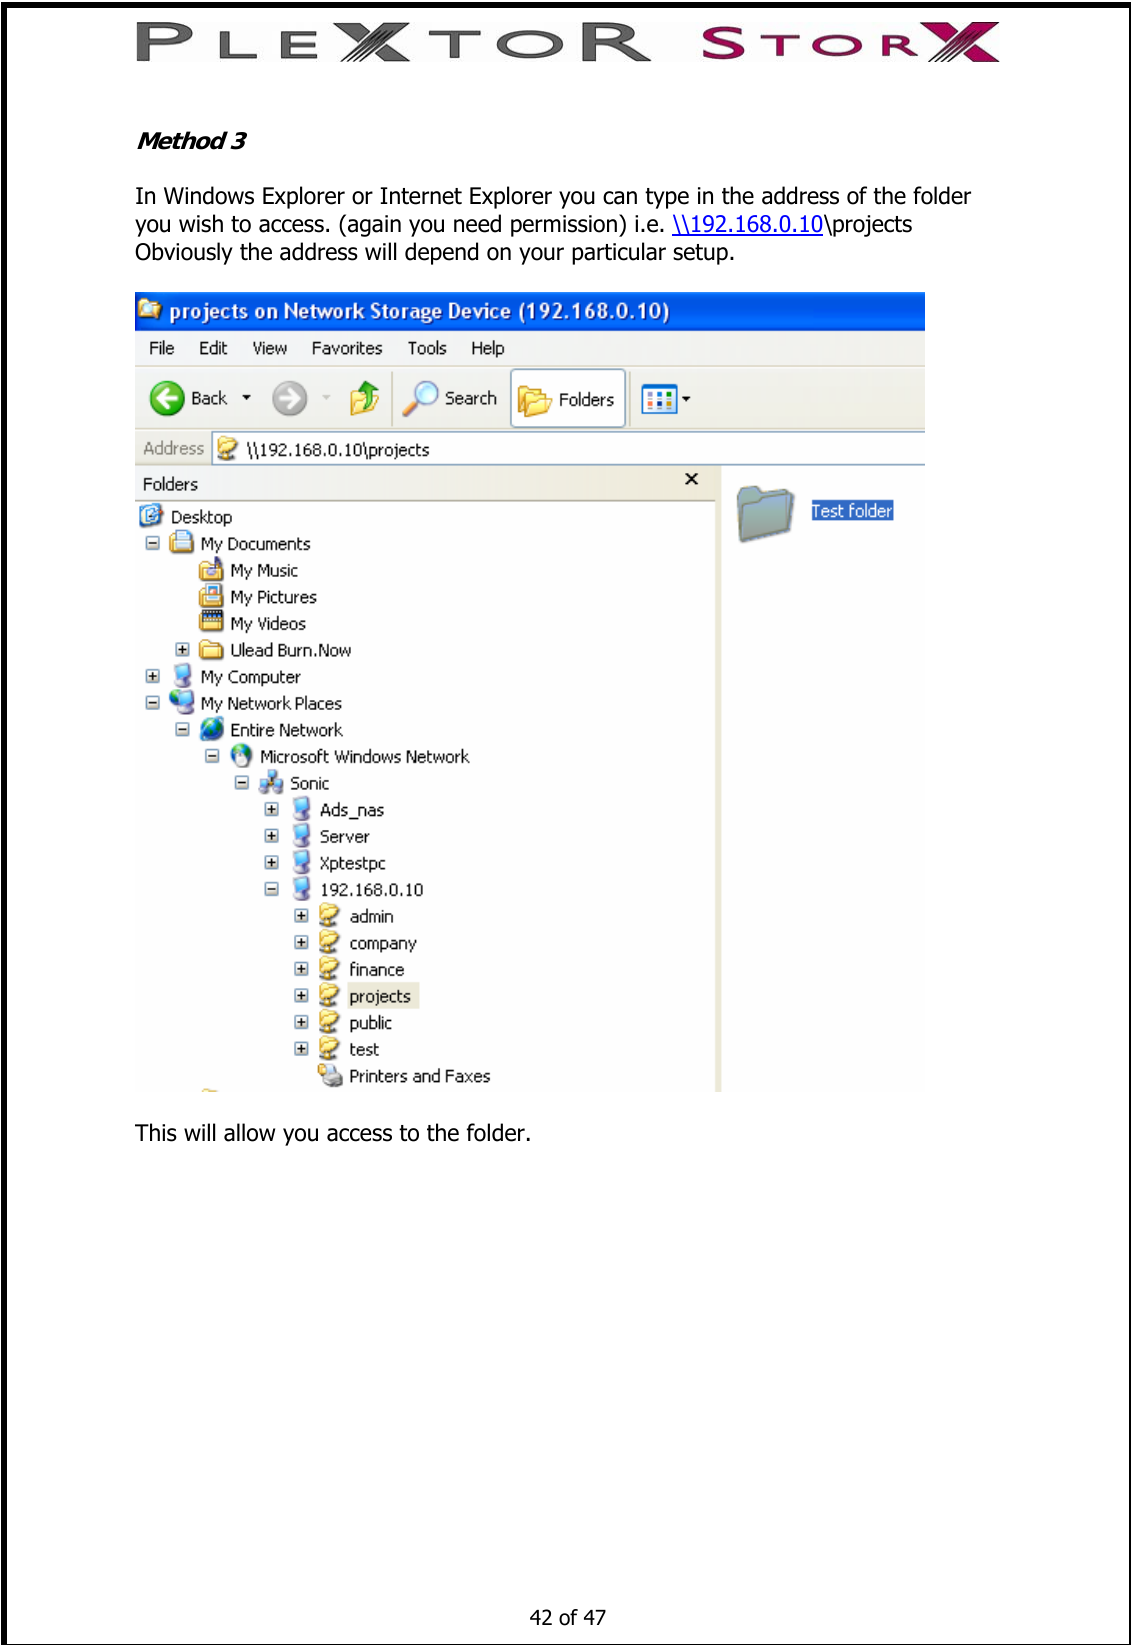   Method 3  In Windows Explorer or Internet Explorer you can type in the address of the folder you wish to access. (again you need permission) i.e. \\192.168.0.10\projects Obviously the address will depend on your particular setup.    This will allow you access to the folder.        42 of 47    